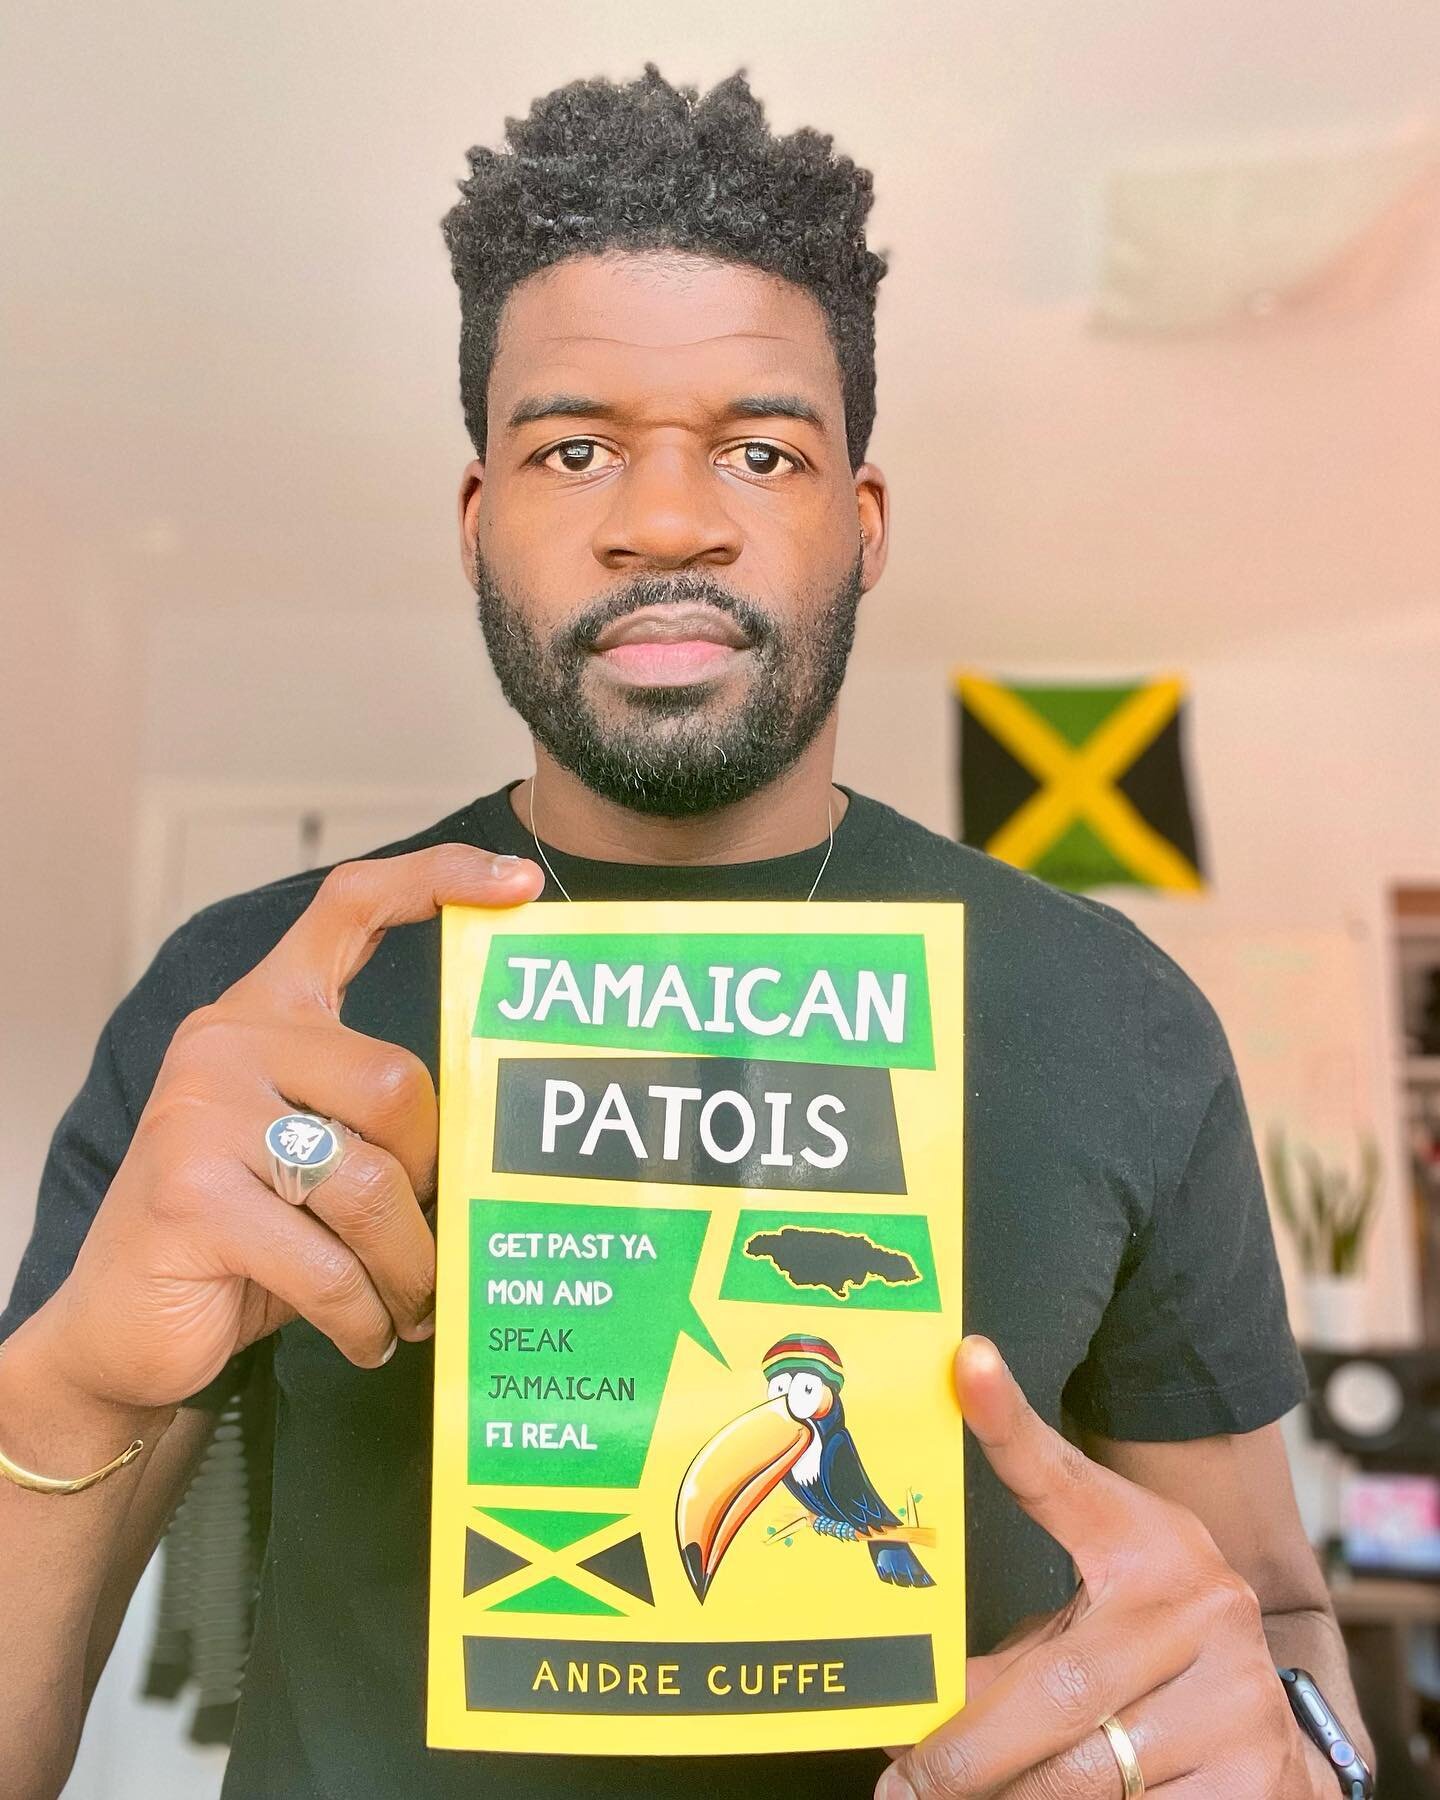 Today is the day!!! My brother&rsquo;s @chattpatwah first book &ldquo;Jamaican Patois: Get Past Ya Mon and Speak Jamaican Fi Real&rdquo; is available now on Amazon. 

Also, join the @chattpatwah community of over 10.1K YouTube subscribers if you are 